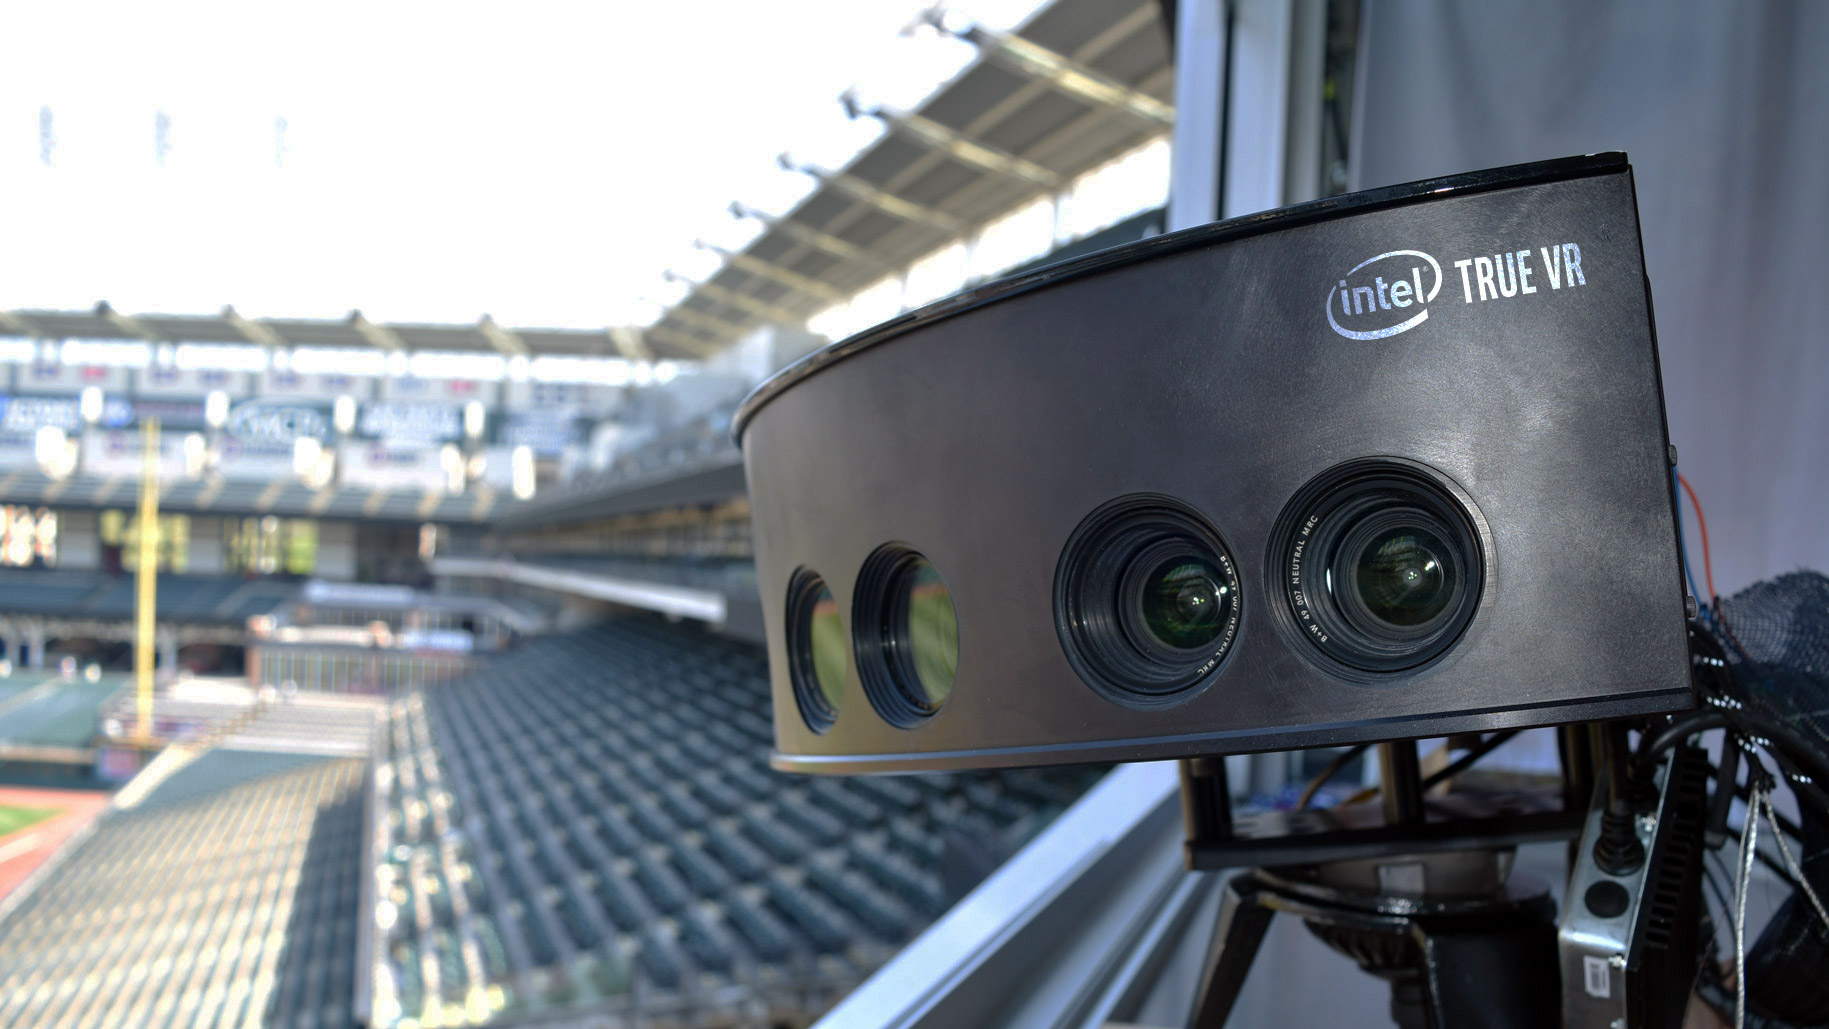 Intel and Major League Baseball Partner to Bring Free Weekly Games Streamed in VR